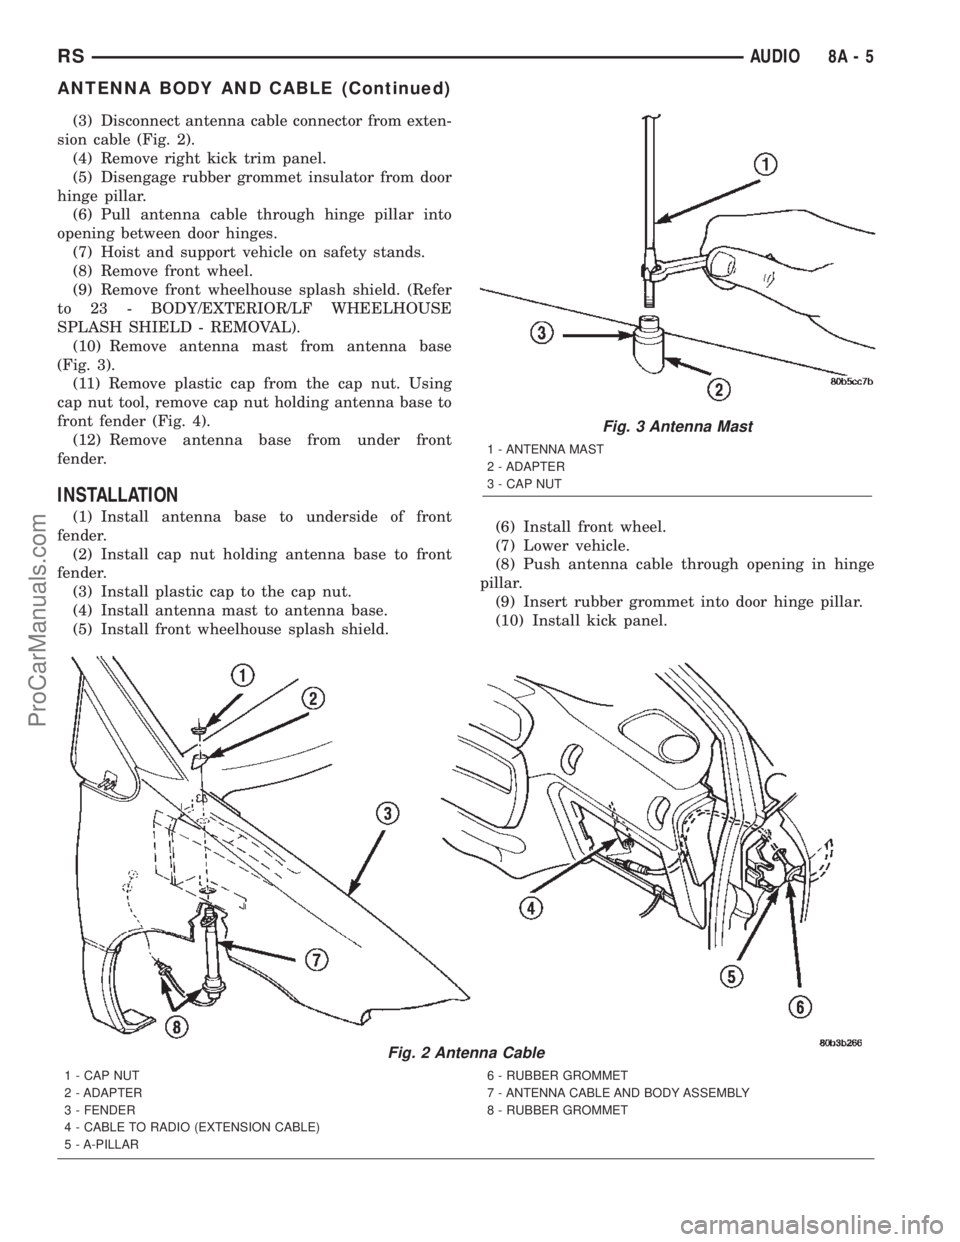 CHRYSLER TOWN AND COUNTRY 2002  Service Manual (3) Disconnect antenna cable connector from exten-
sion cable (Fig. 2).
(4) Remove right kick trim panel.
(5) Disengage rubber grommet insulator from door
hinge pillar.
(6) Pull antenna cable through 